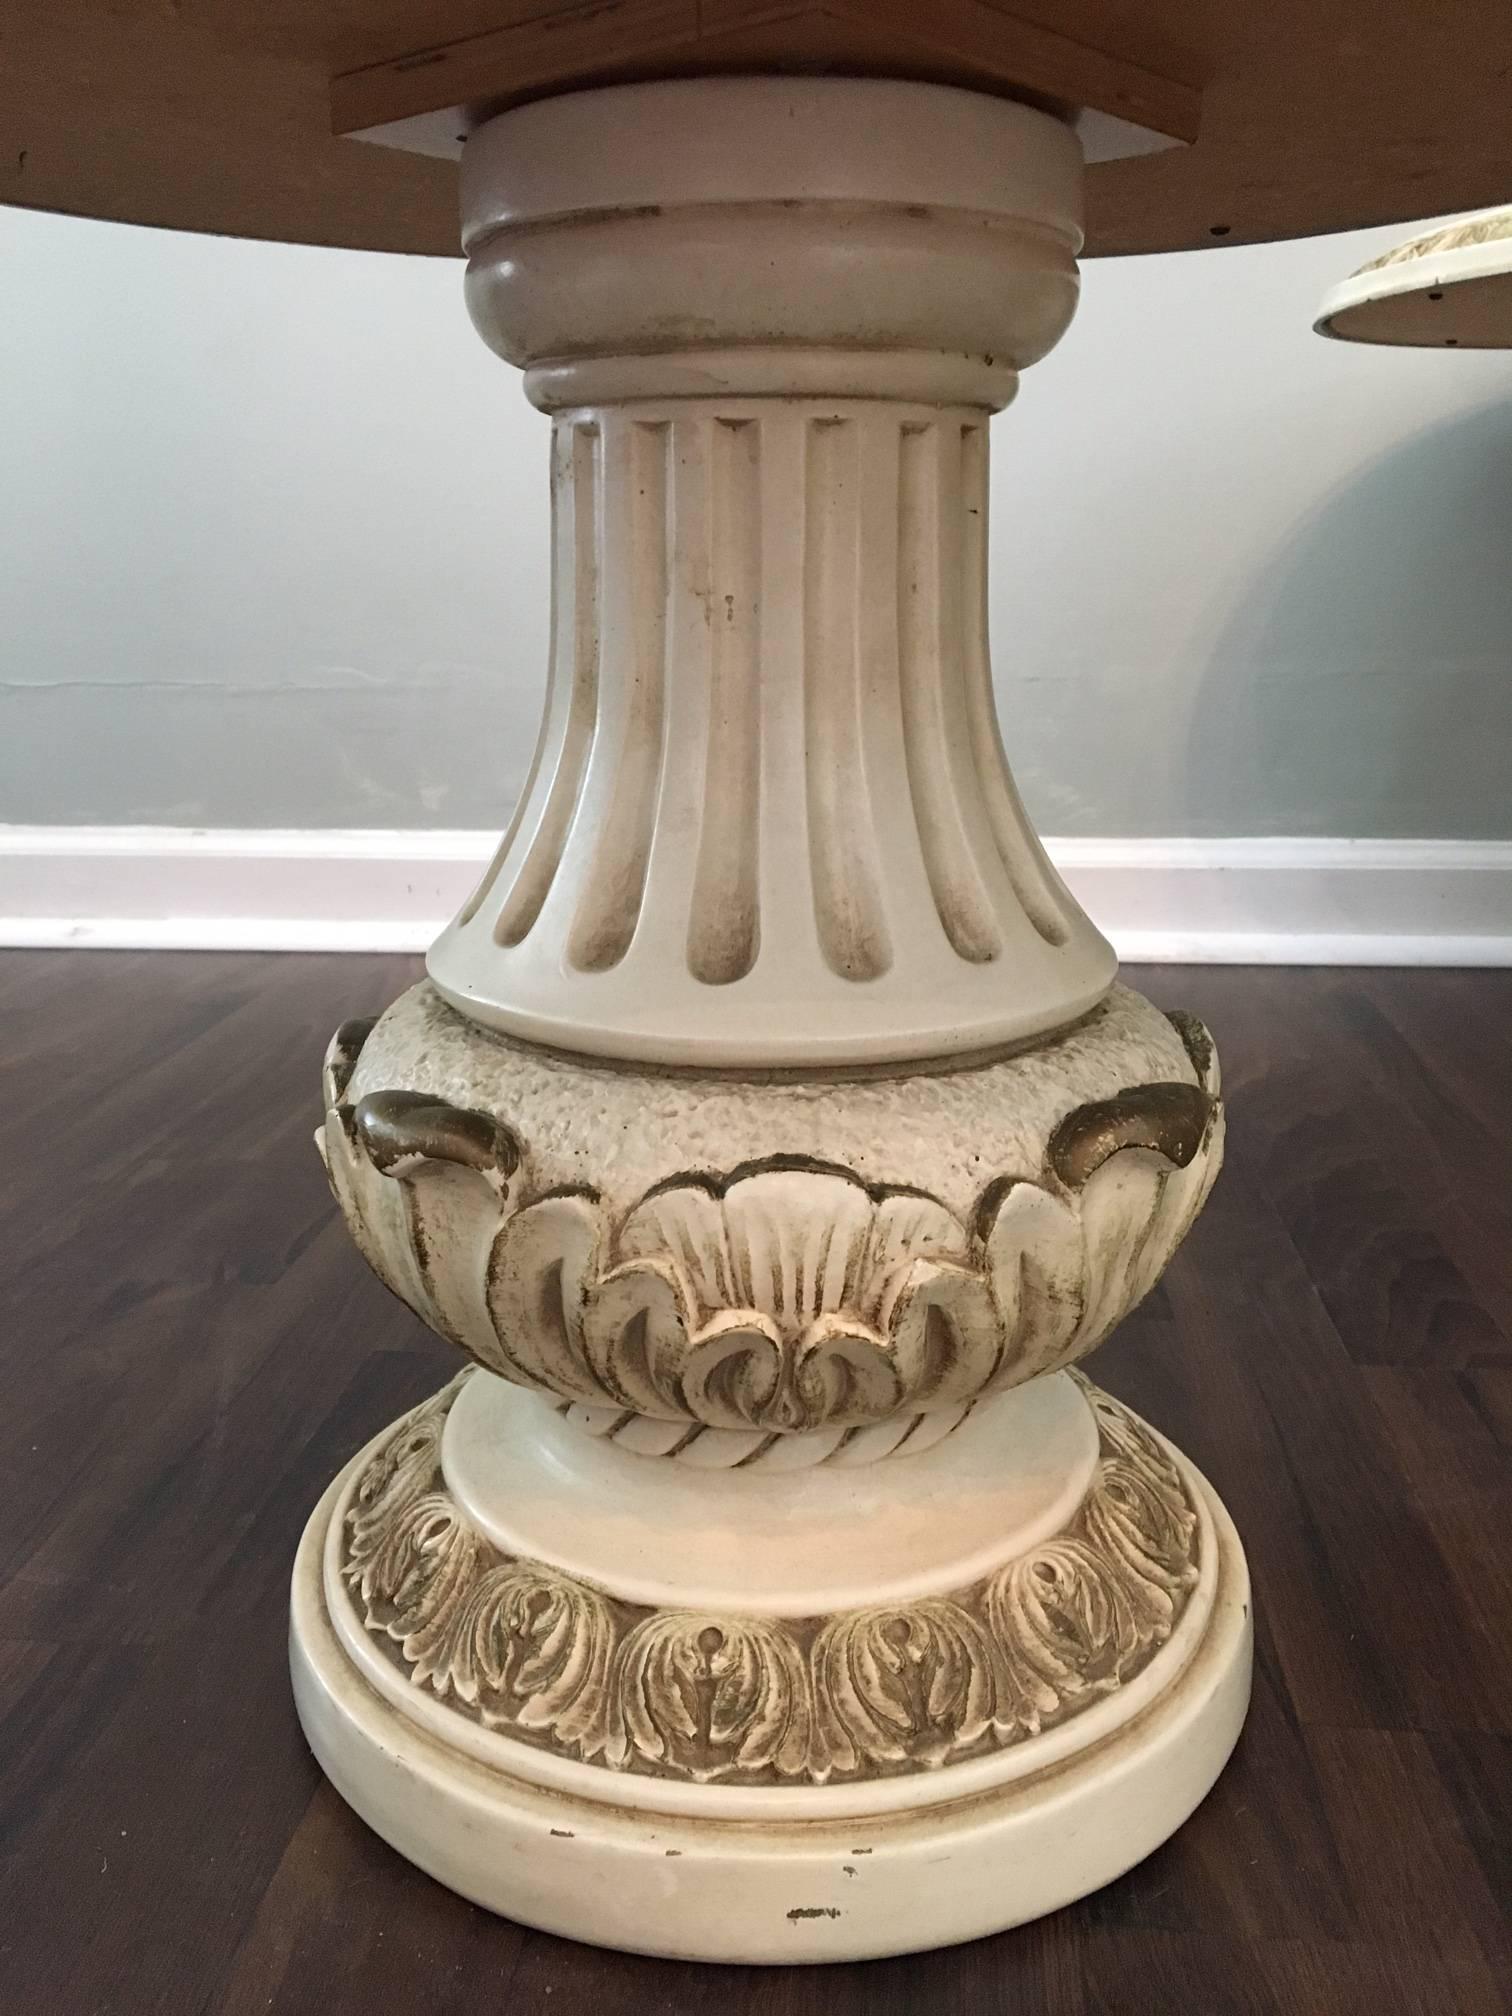 Pair of Italian style column side tables feature marbled glass tops and carved detailing. Perfect for your Hollywood Regency decor. Very good vintage condition.